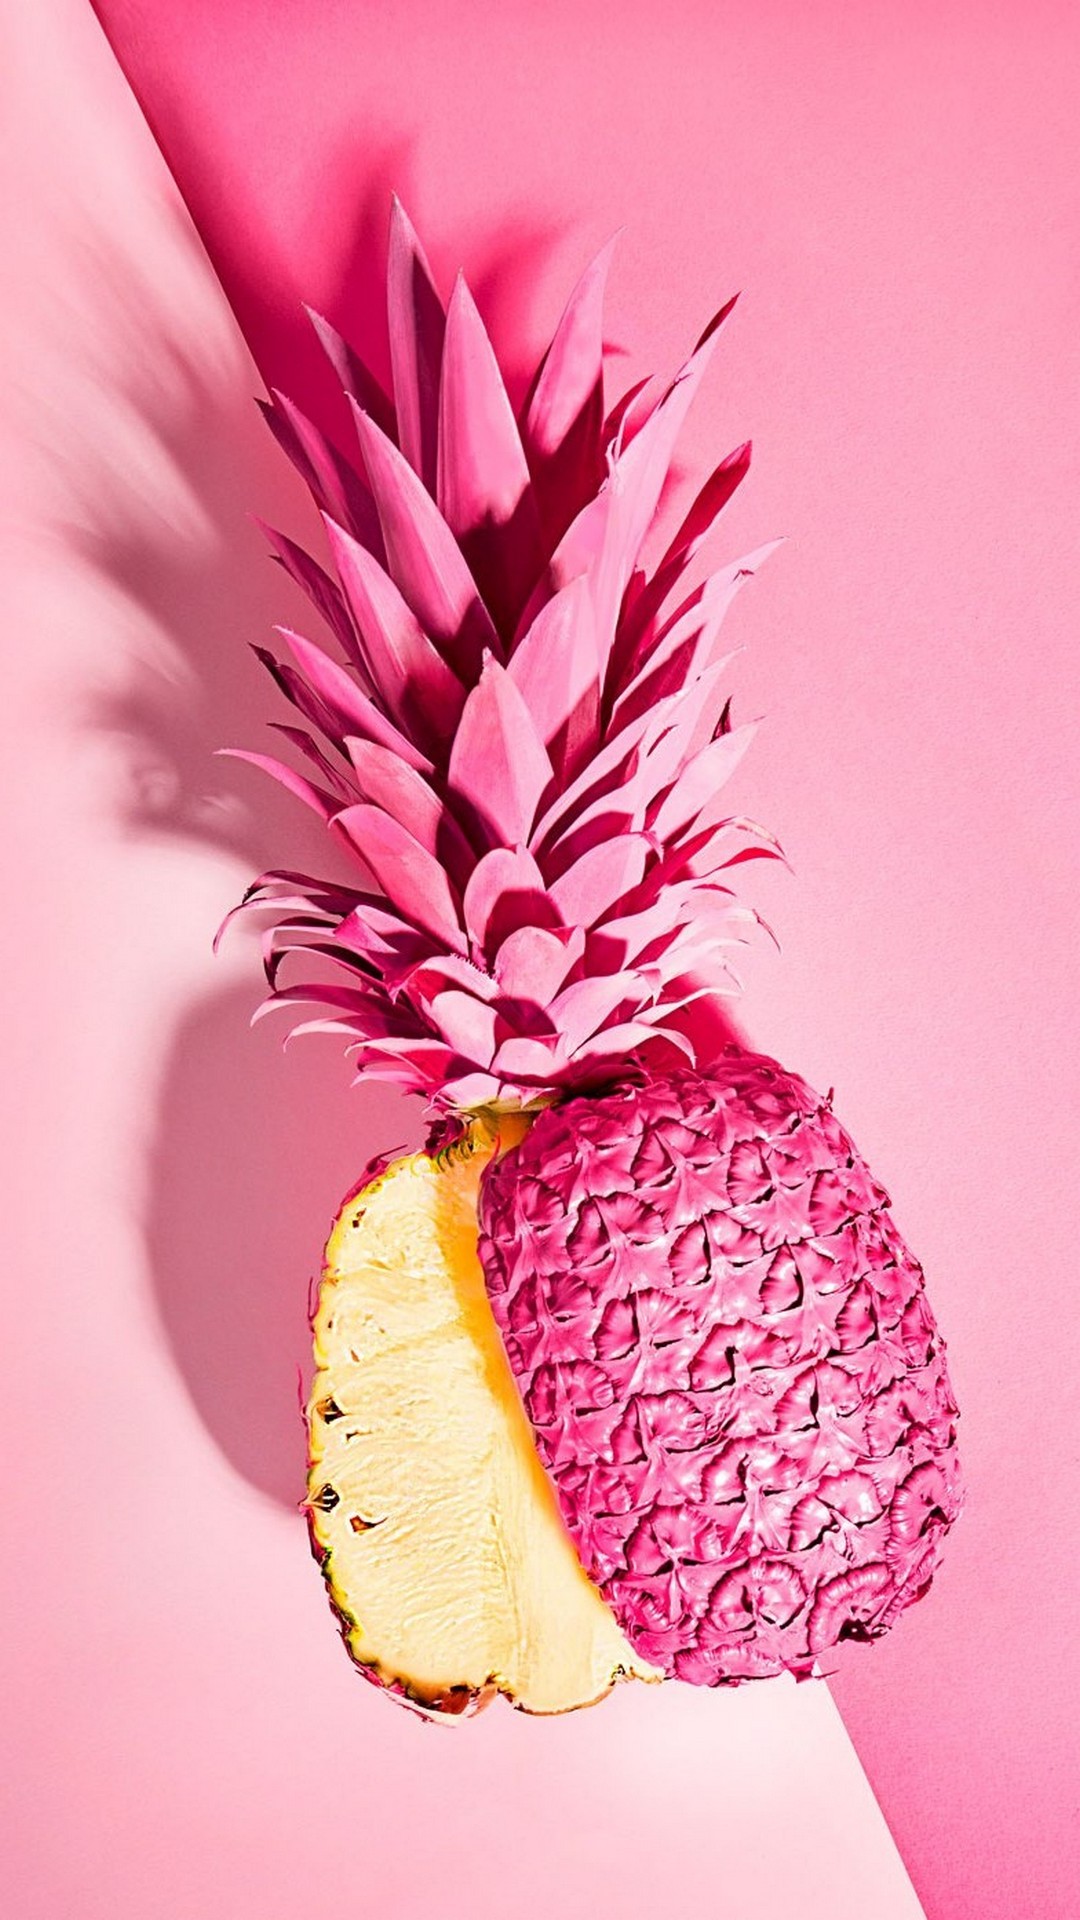 Best Pink Pineapple Wallpaper iPhone with HD resolution 1080x1920